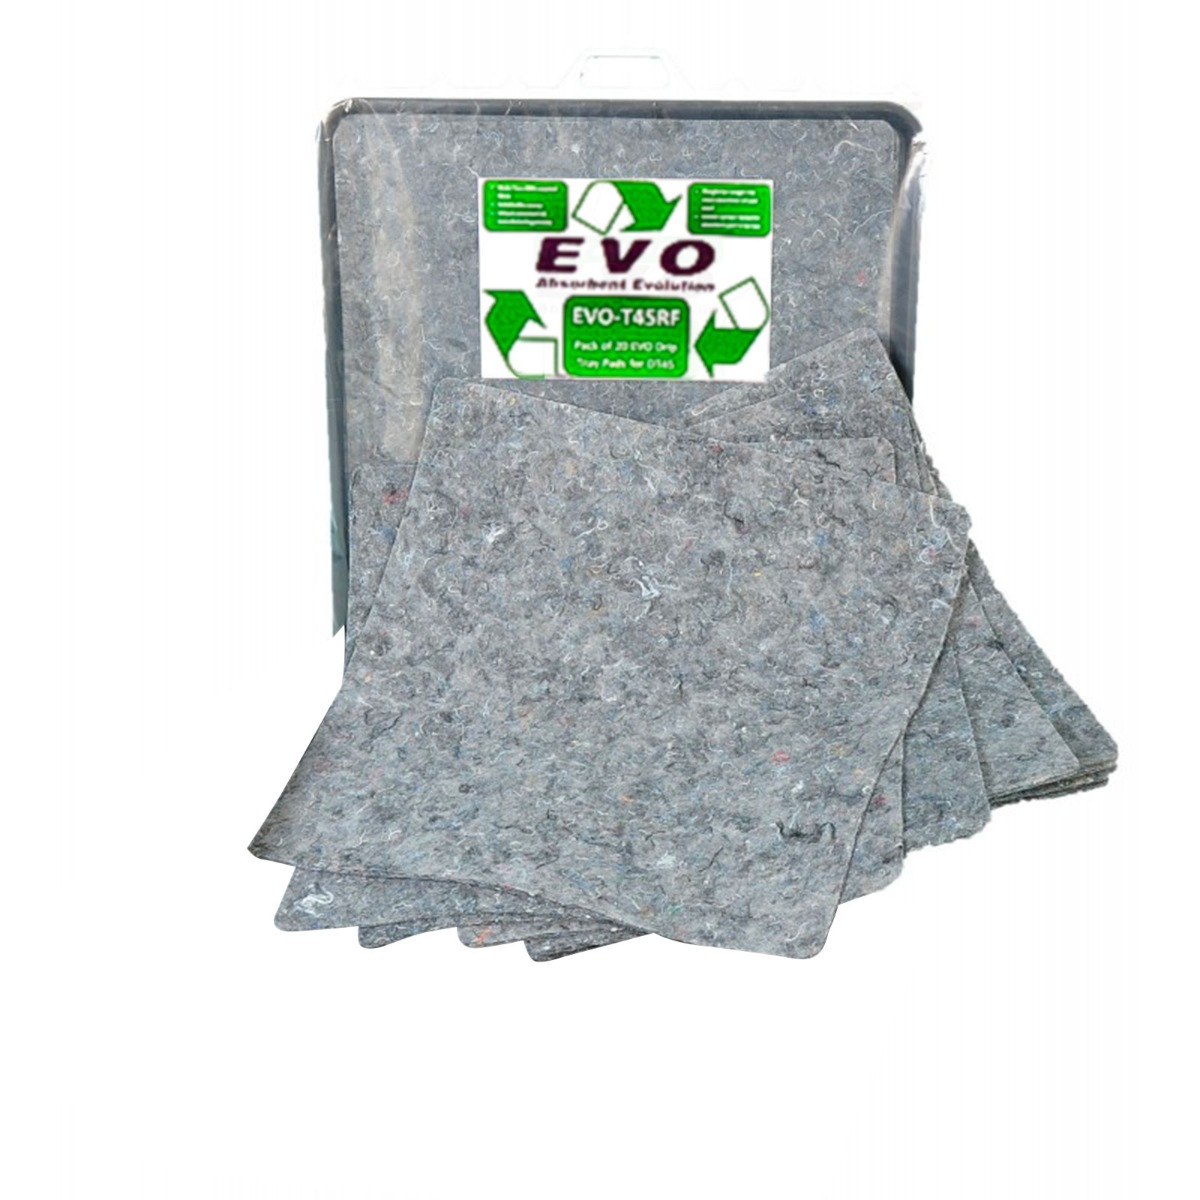 20 EVO Pads Refill Pack for T45 - 59 x 59 x 1cm